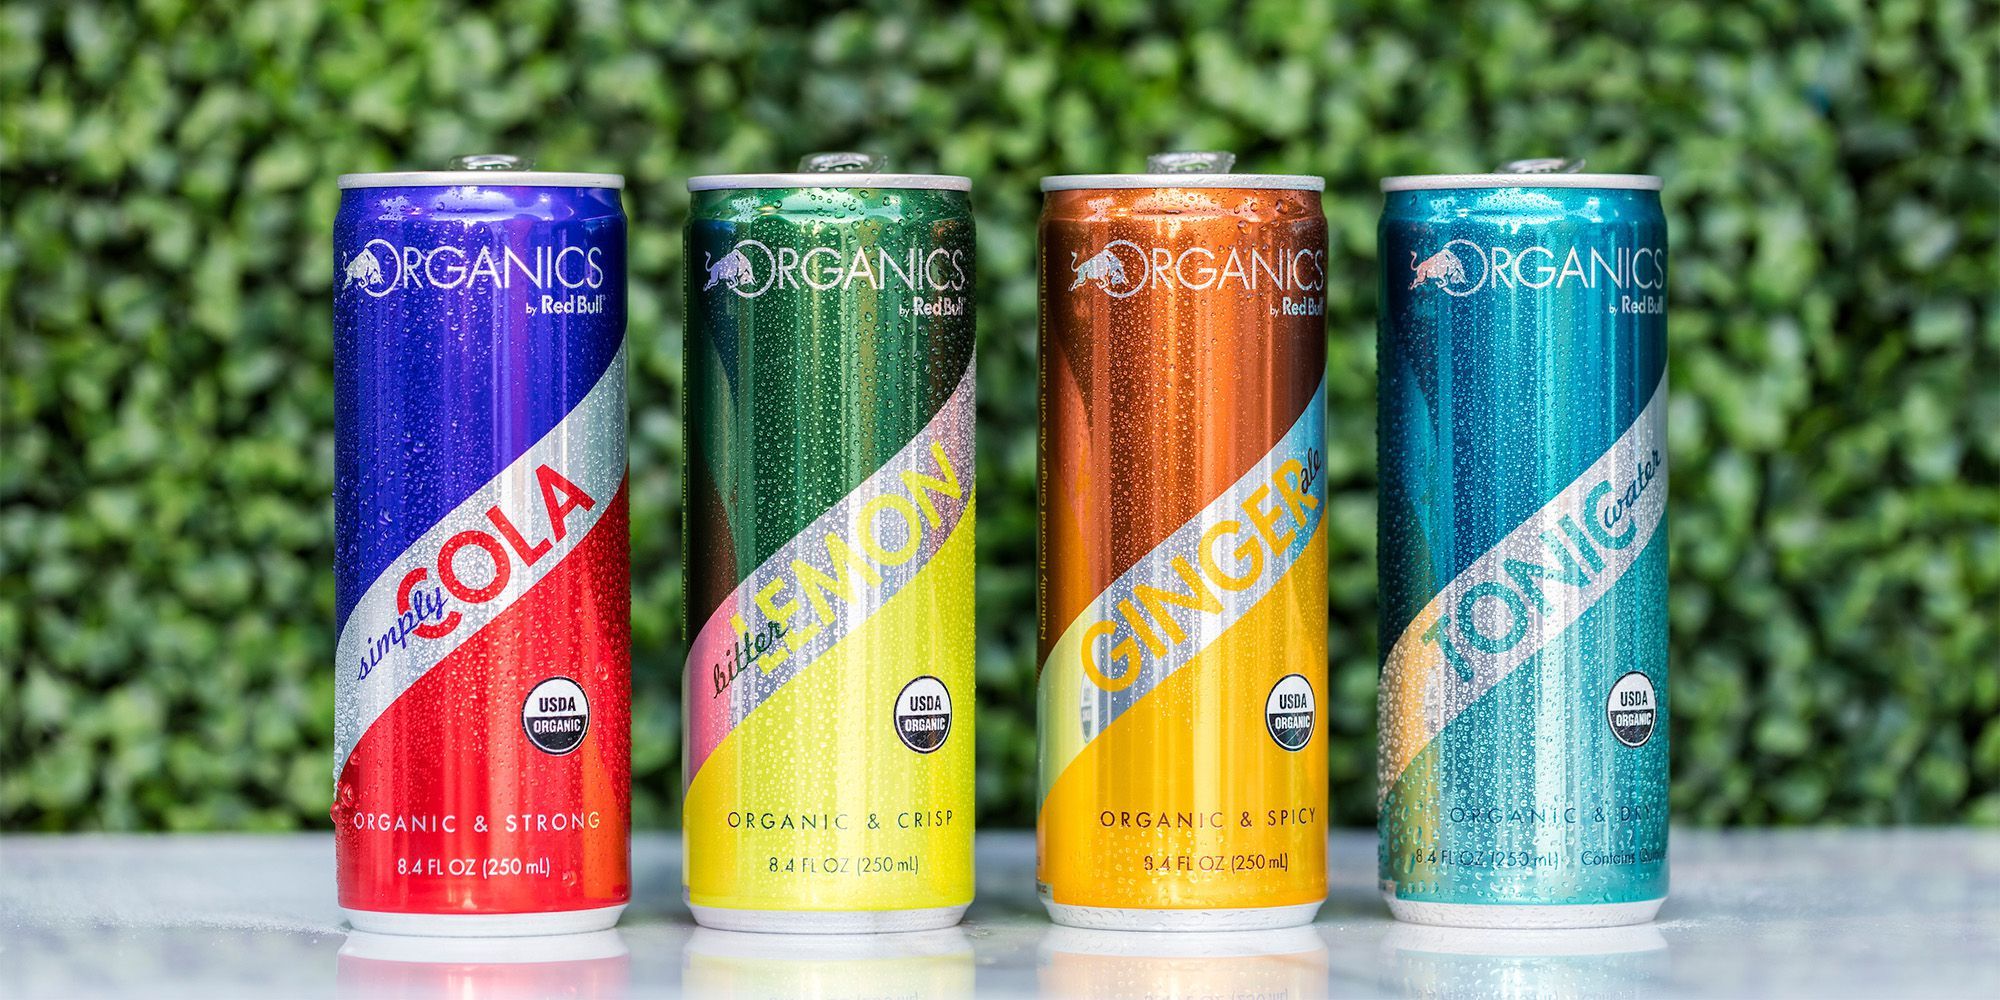 Red Bull Releases Its First Non-Energy Drinks, Called Organics